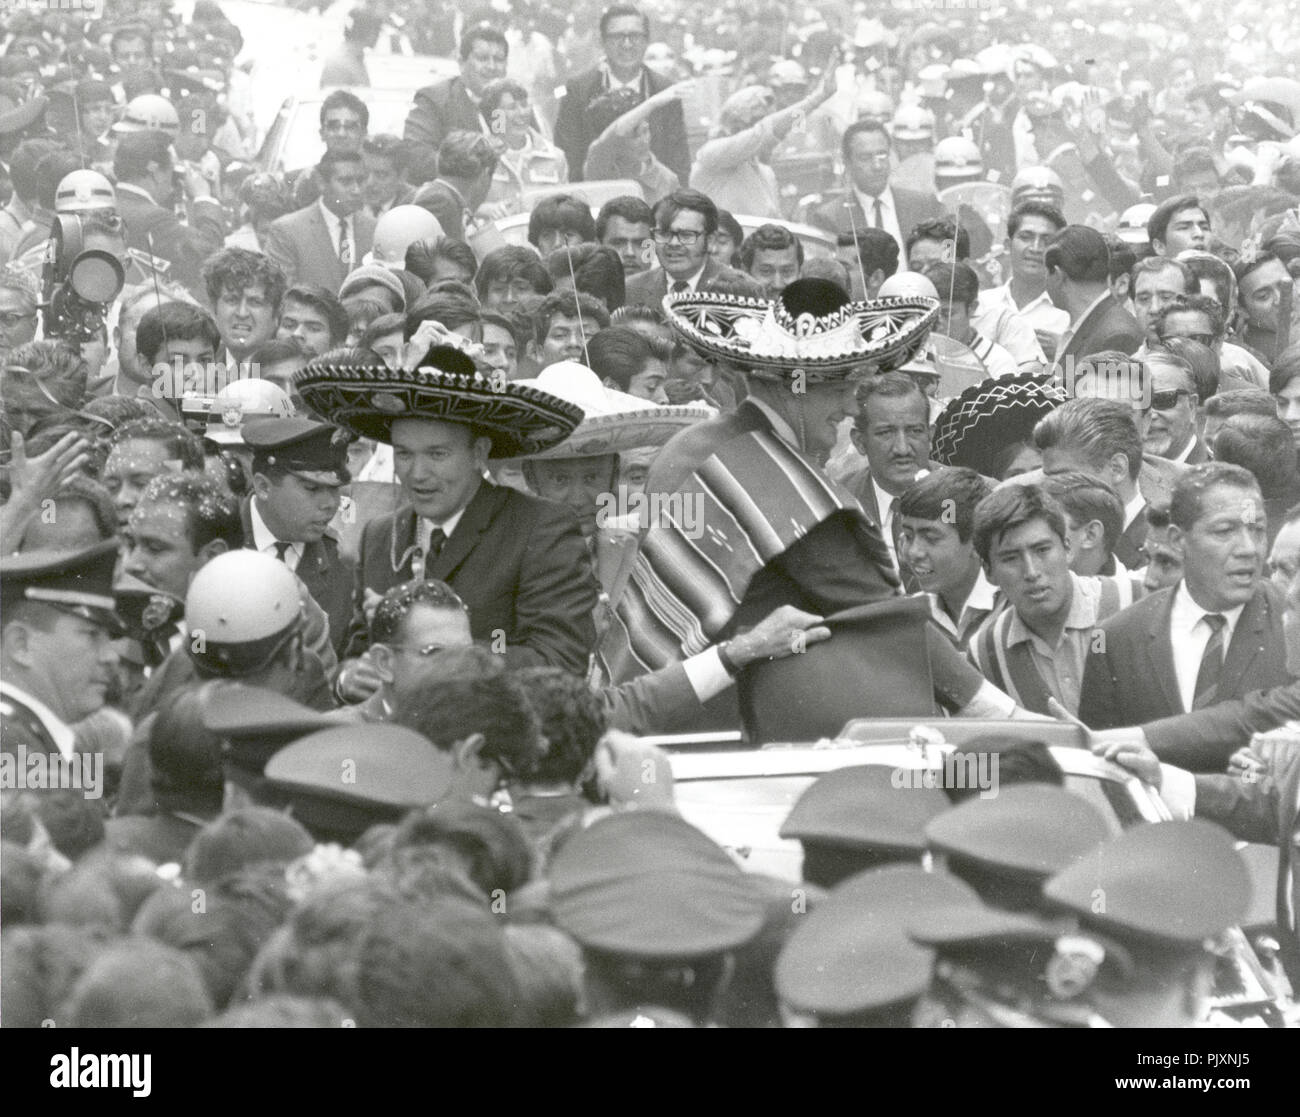 Mexico City, Mexico - (FILE) -- The Apollo 11 astronauts, Neil A. Armstrong, Edwin E. Aldrin, Jr., and Michael Collins, wearing sombreros and ponchos, are swarmed by thousands in Mexico City as their motorcade is slowed by the enthusiastic crowd on September 23, 1969. The GIANTSTEP-APOLLO 11 Presidential Goodwill Tour emphasized the willingness of the United States to share its space knowledge. The tour carried the Apollo 11 astronauts and their wives to 24 countries and 27 cities in 45 days. Credit: NASA via CNP /MediaPunch Stock Photo